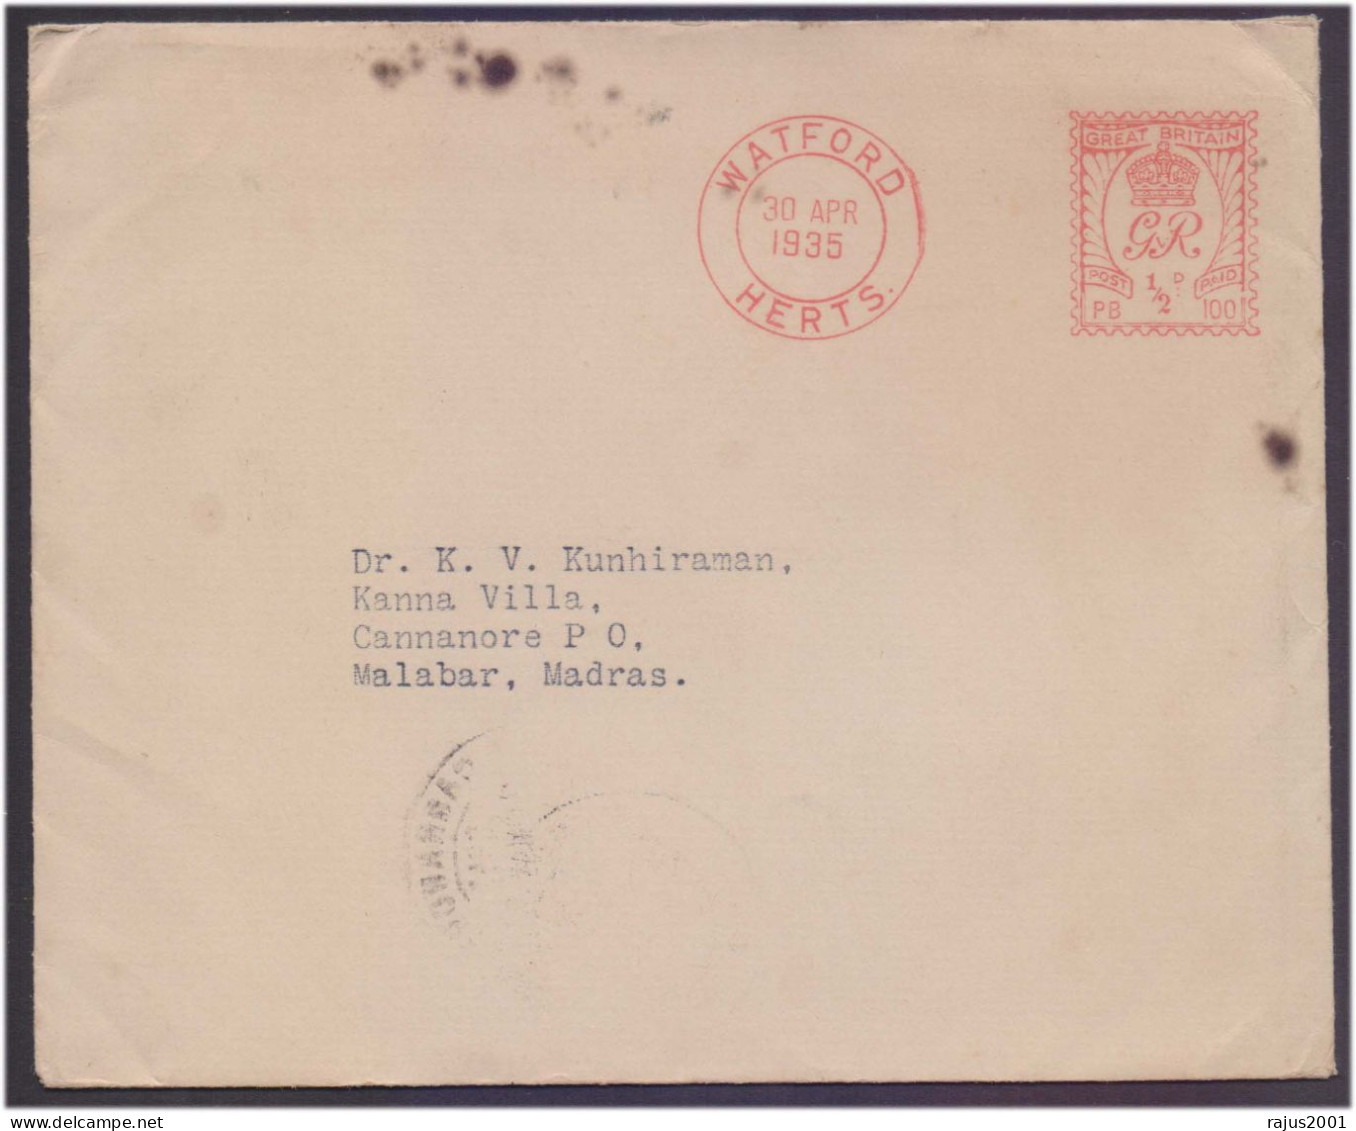 WATFORD HERTS EMA RED METER FRANK BRITAIN TO MALABAR MADRAS INDIA CIRCULATED COVER 1935 CLEAR DELIVERY MARK As Scan - Máquinas Franqueo (EMA)